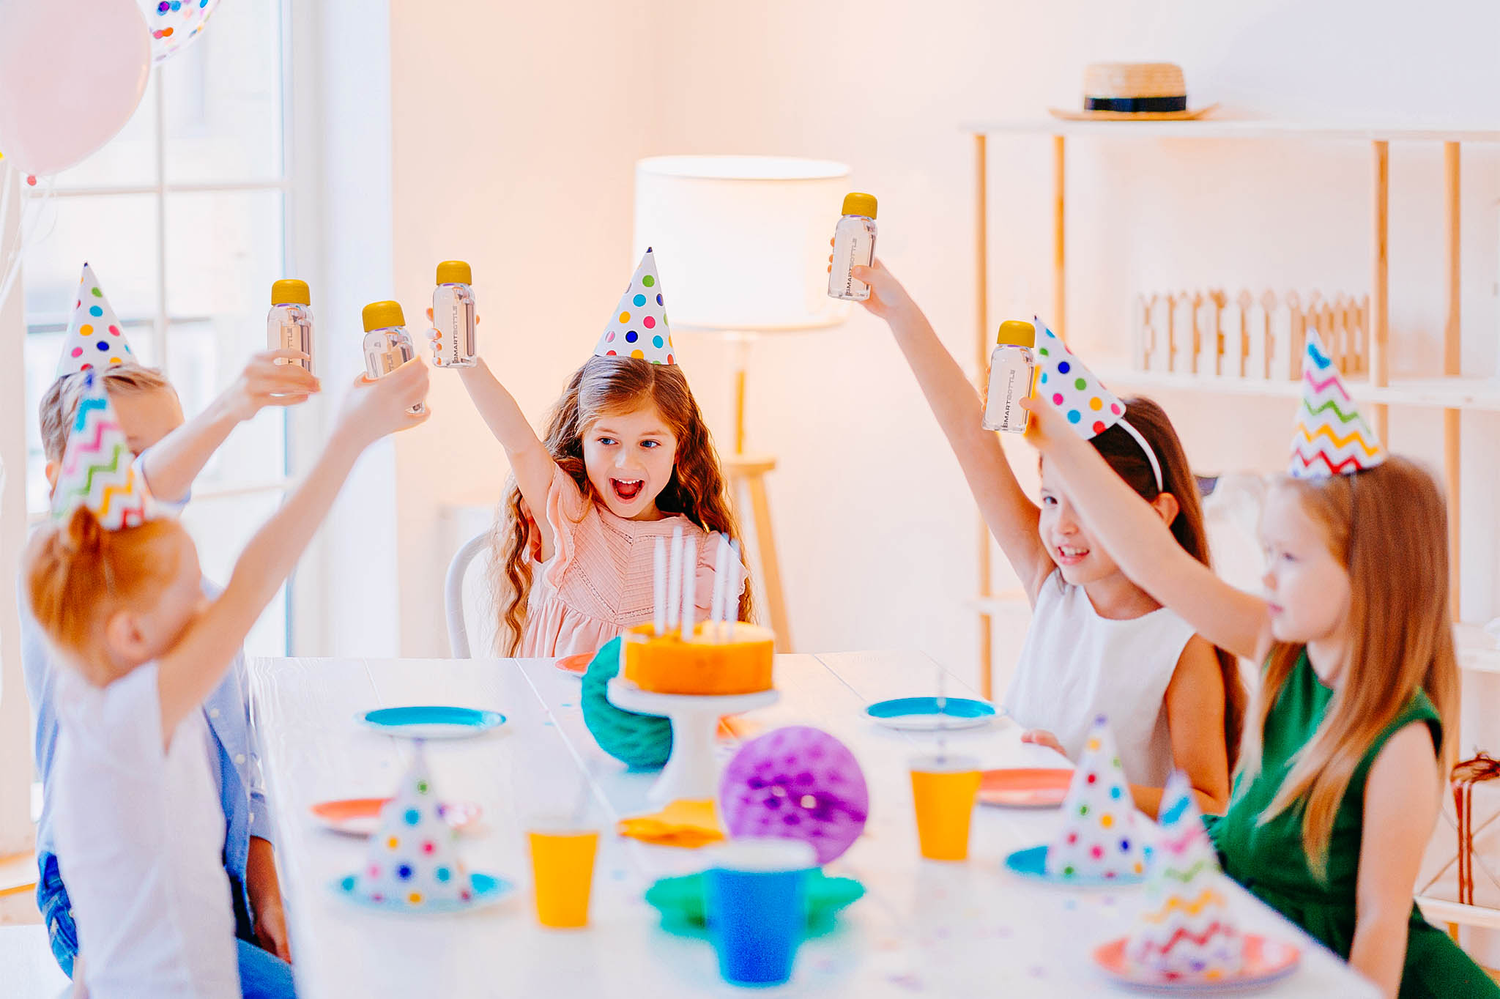 Kids having a party and holding their Smartbottle minis up high